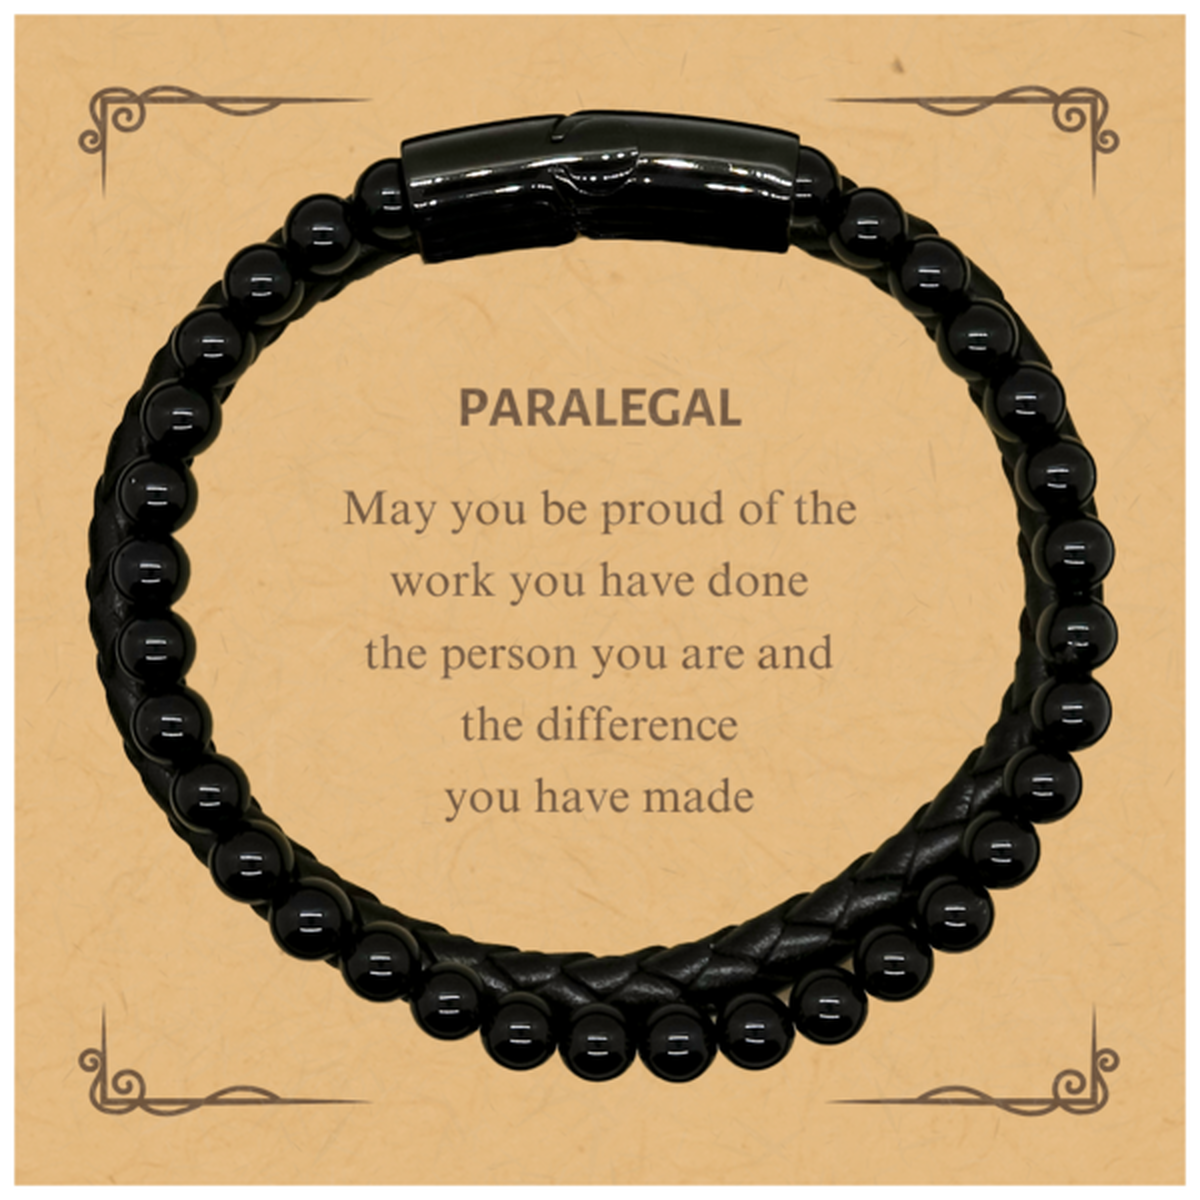 Paralegal May you be proud of the work you have done, Retirement Paralegal Stone Leather Bracelets for Colleague Appreciation Gifts Amazing for Paralegal